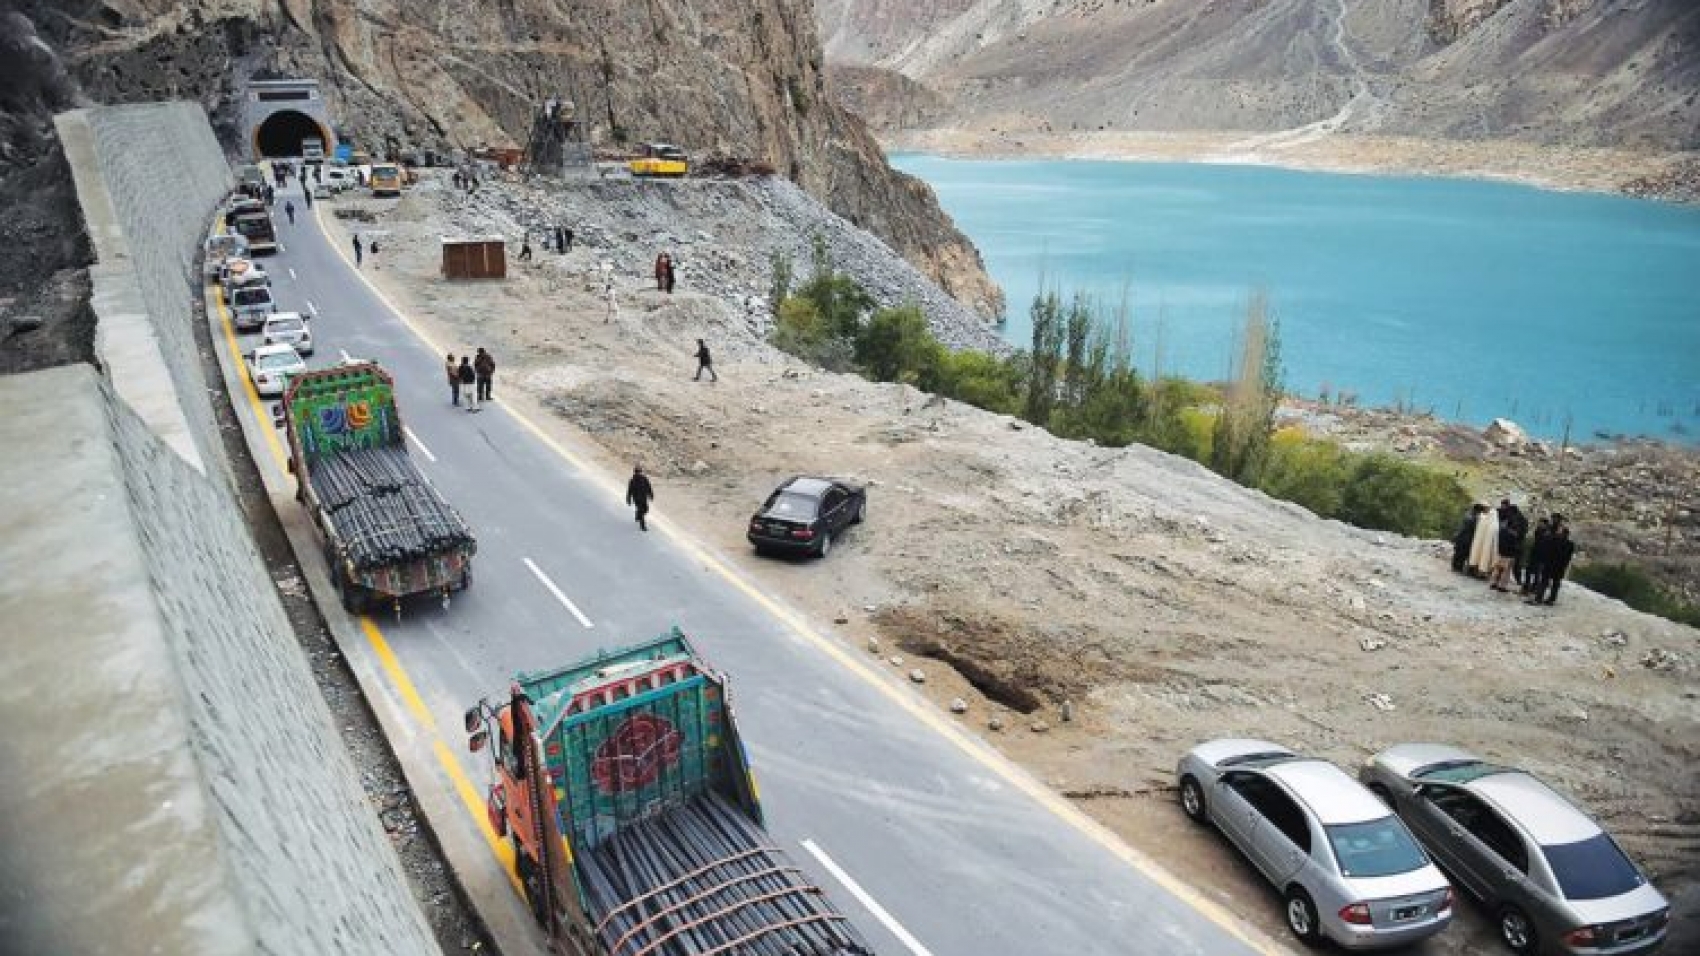 To go with story 'Pakistan-China-economy-transport, FEATURE' by Guillaume LAVALLÉE
In this photograph taken on September 29, 2015, Pakistani commuters wait to travel through a newly built tunnel in northern Pakistan's Gojal Valley.  A glossy highway and hundreds of lorries transporting Chinese workers by the thousands: the new Silk Road is under construction in northern Pakistan, but locals living on the border are yet to be convinced they will receive more from it than dust.    AFP PHOTO / Aamir QURESHI